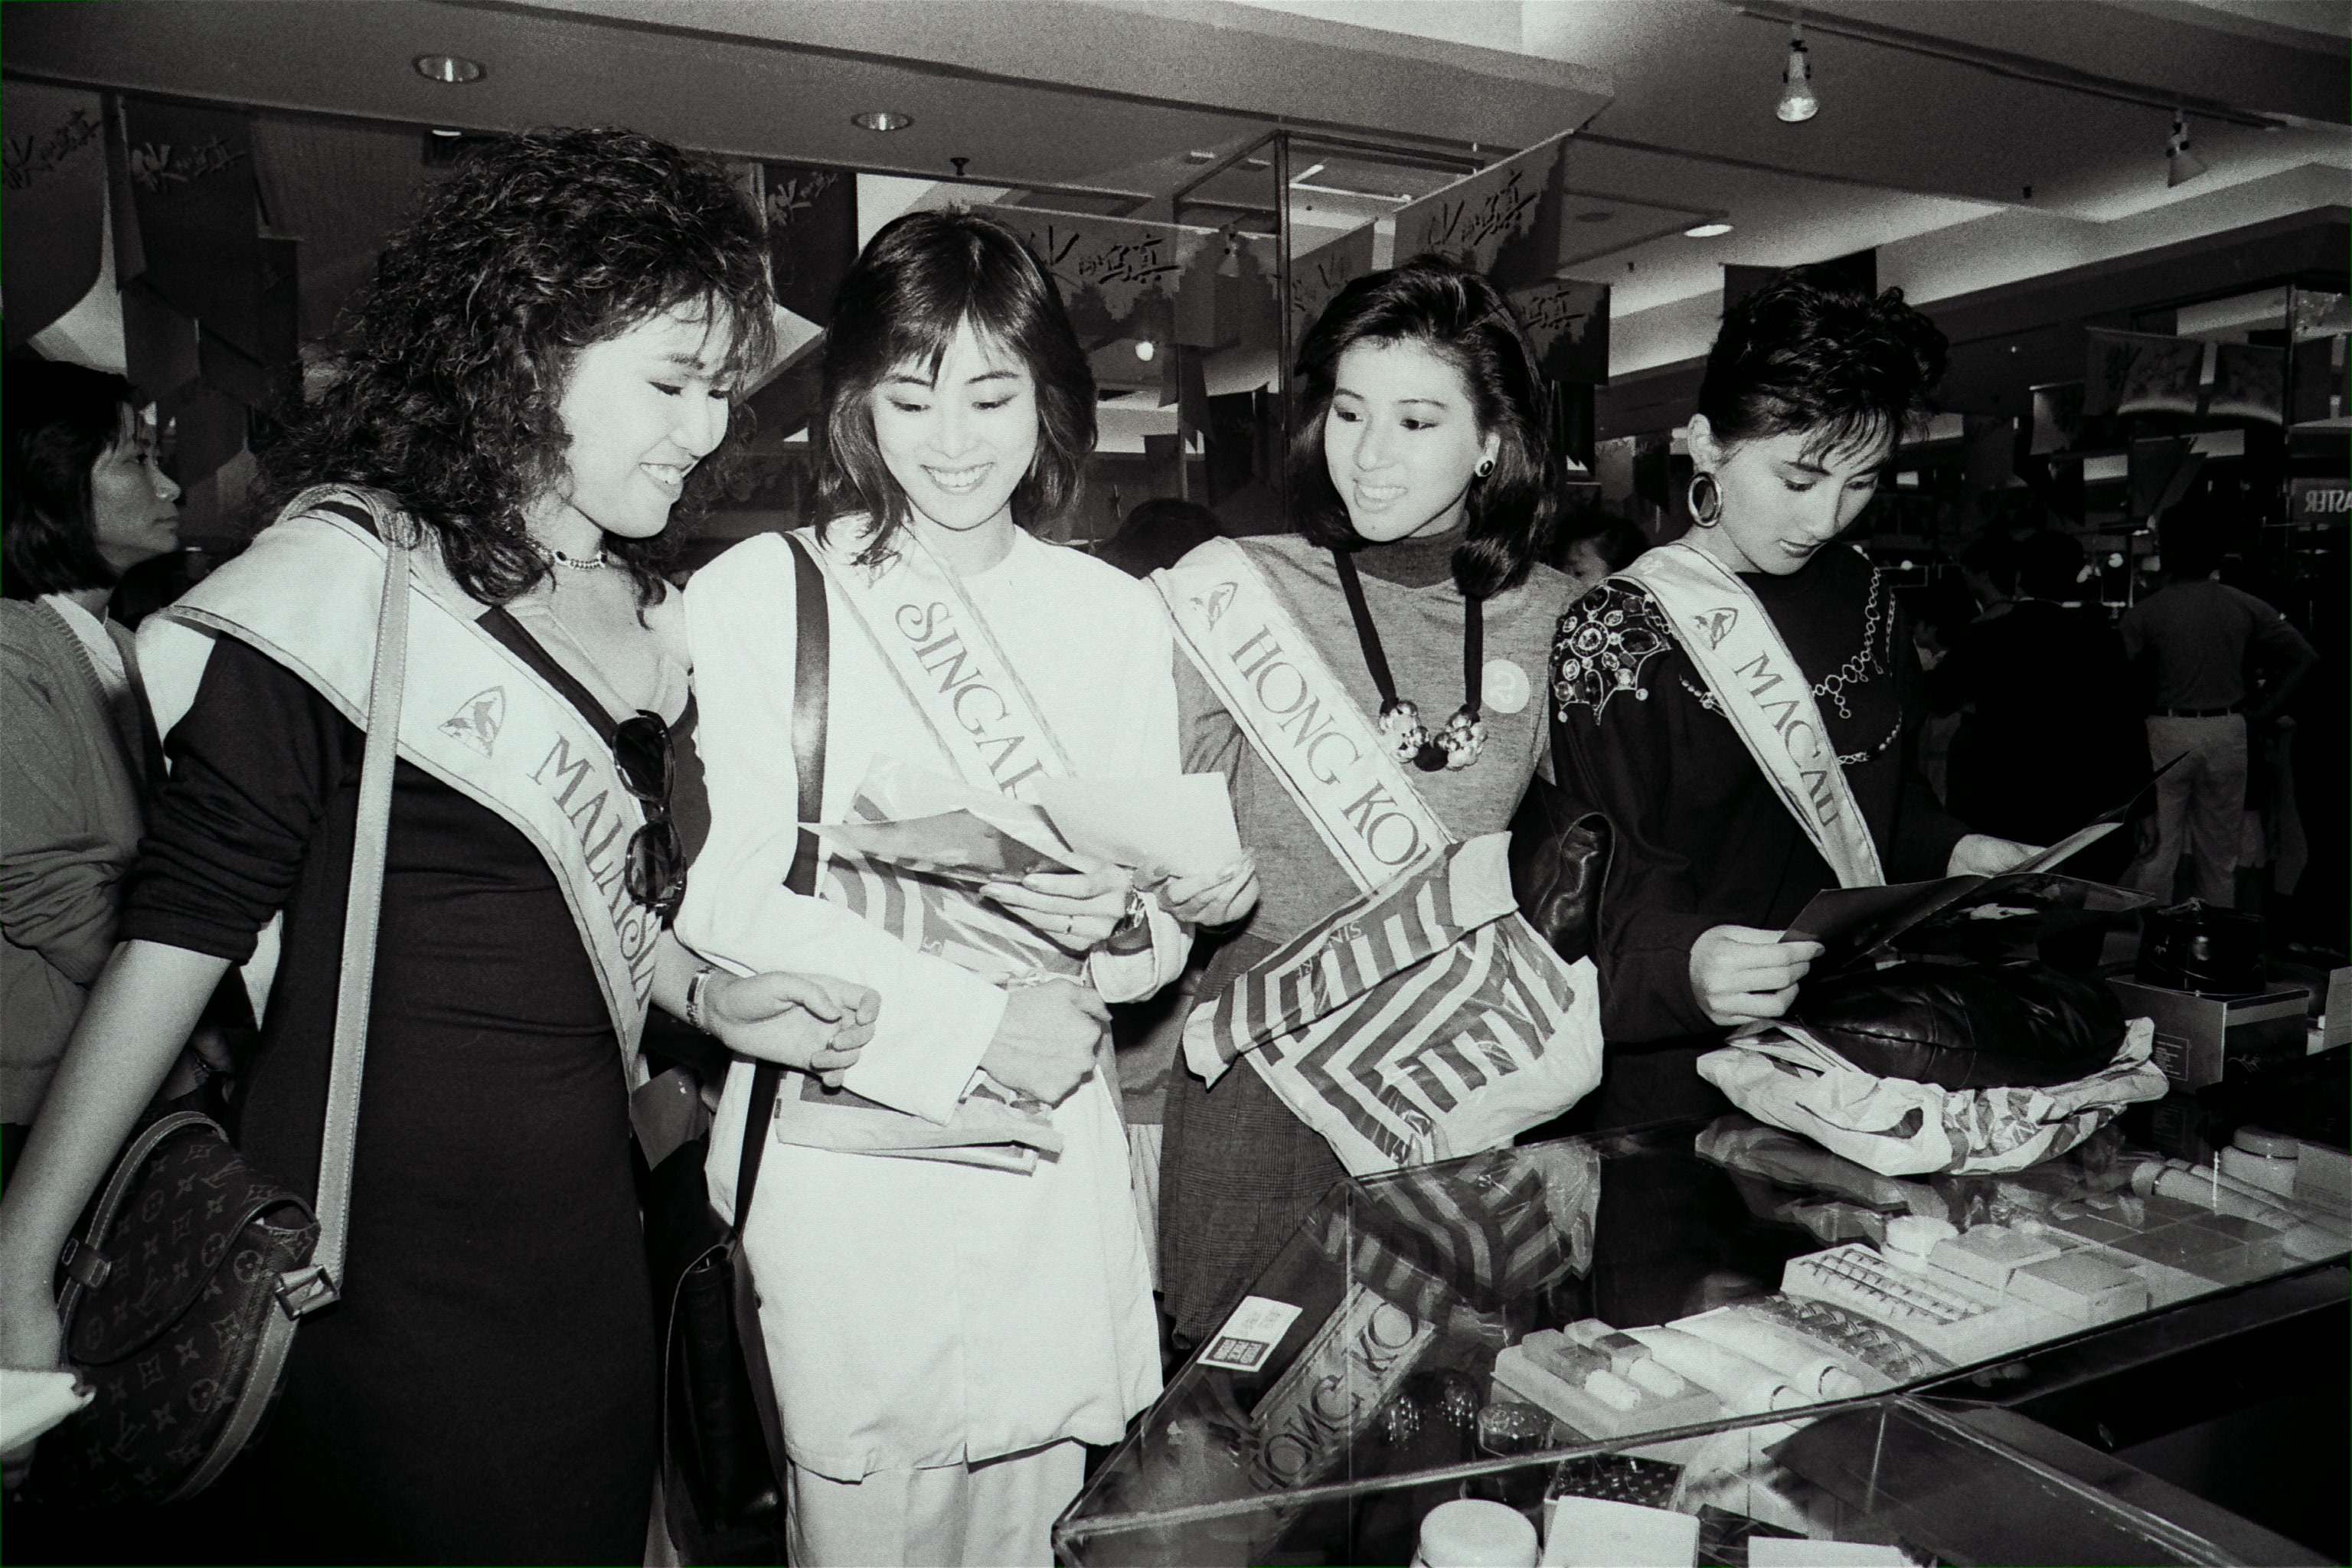 Sincere helped to sponsor important fashion and cultural events in Hong Kong over the years. In this undated file photo, four contestants for the Miss Asia Pacific Quest beauty pageant share the centre court at a Sincere department store event.